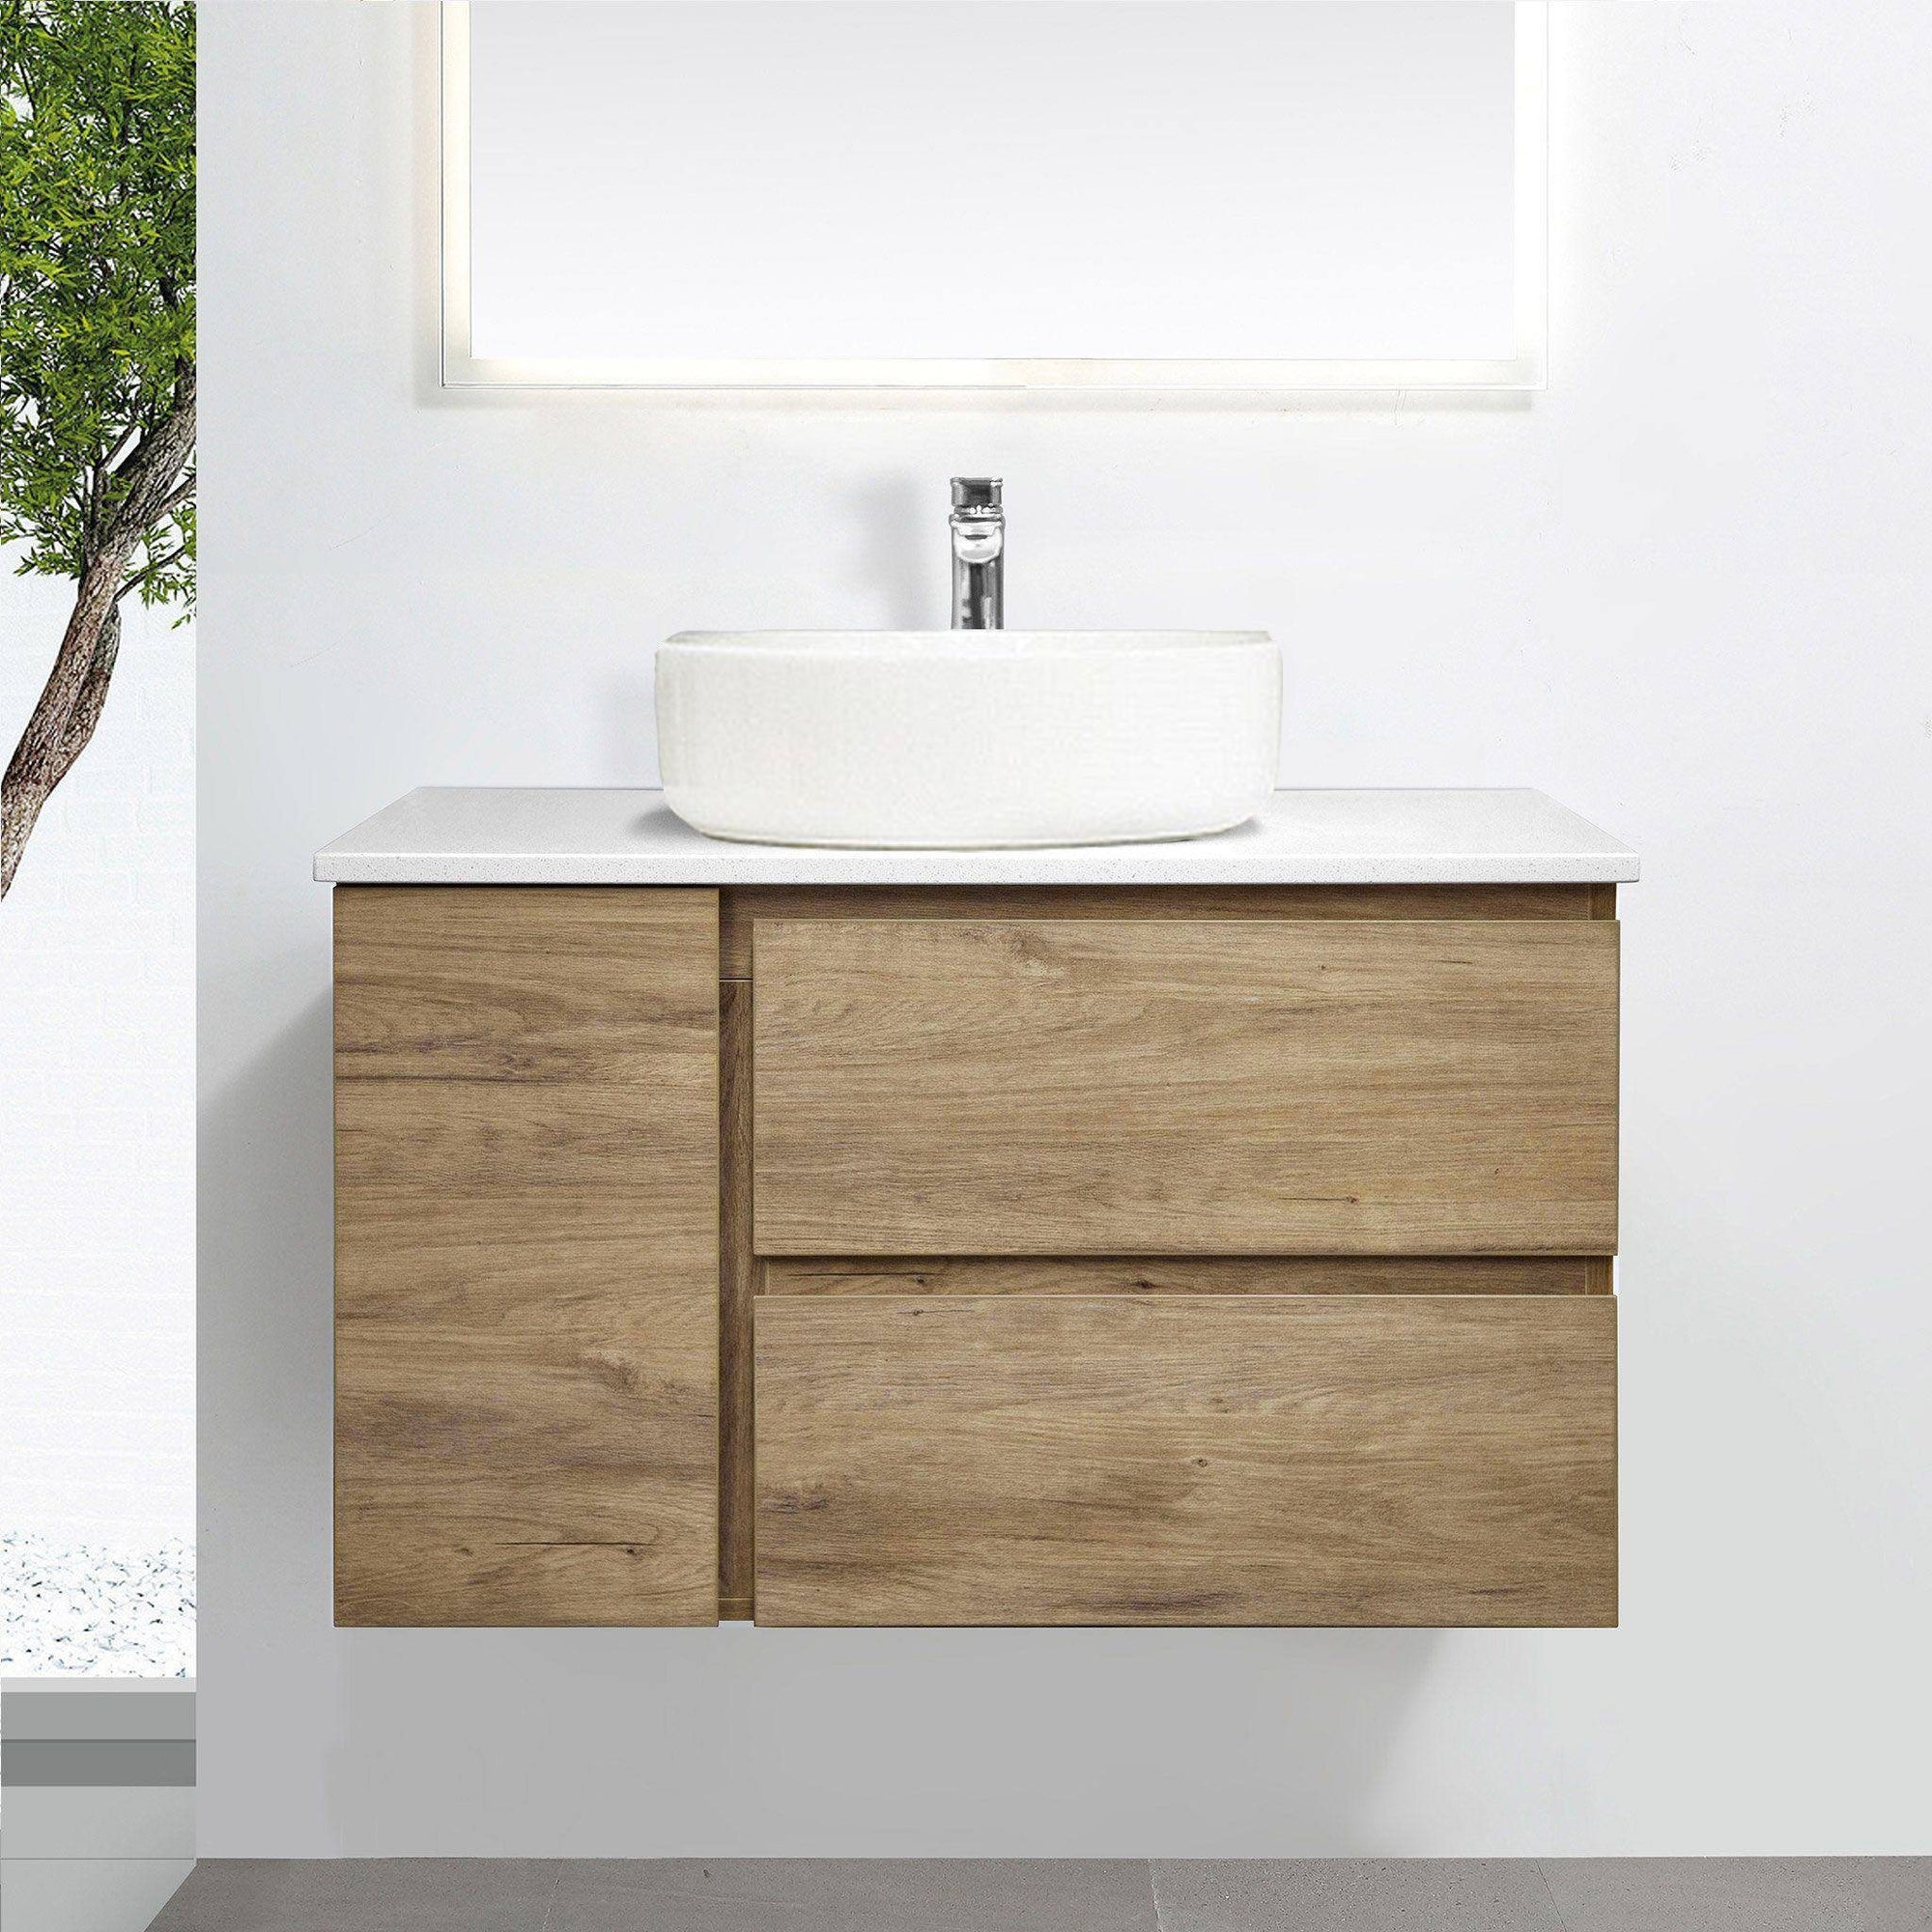 ALBANY 90cm Oak Timber Wall Hung Vanity Vanities & Mirrors Arova BLISS Speckled Stone Top CB1201N-Square Gloss White Basin 